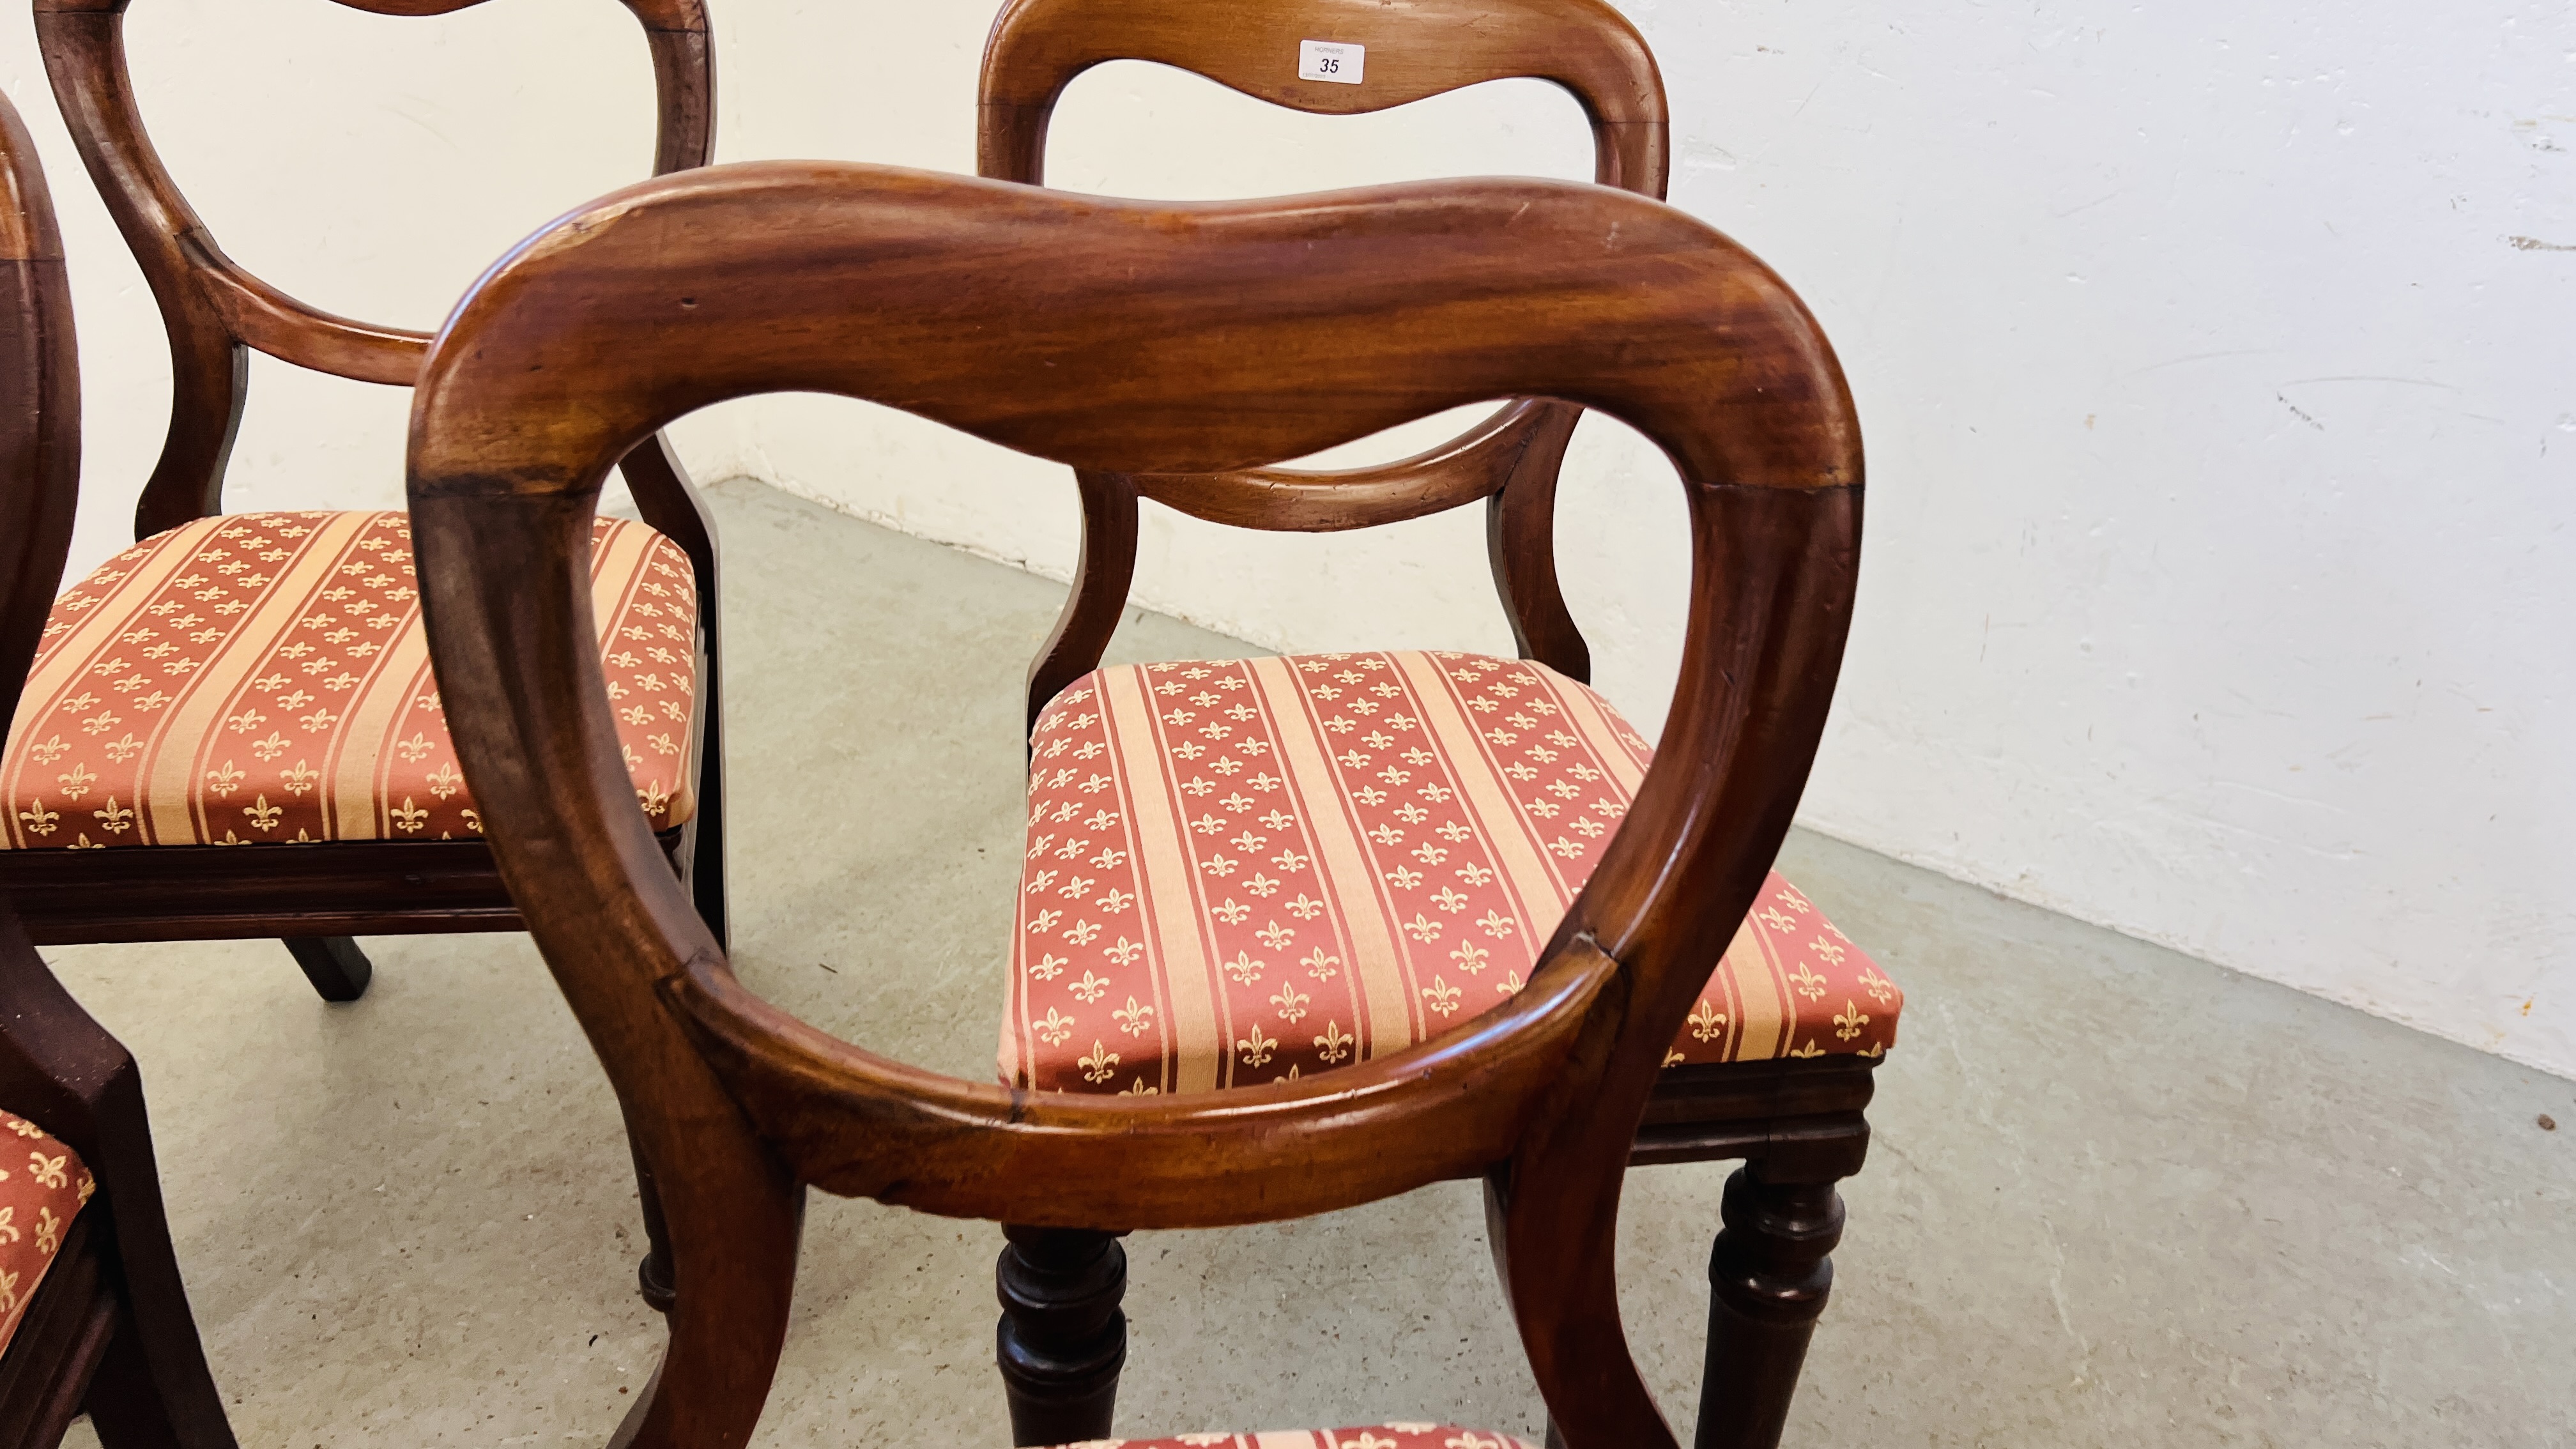 A SET OF FOUR VICTORIAN MAHOGANY SPOON BACK DINING CHAIRS. - Image 4 of 11